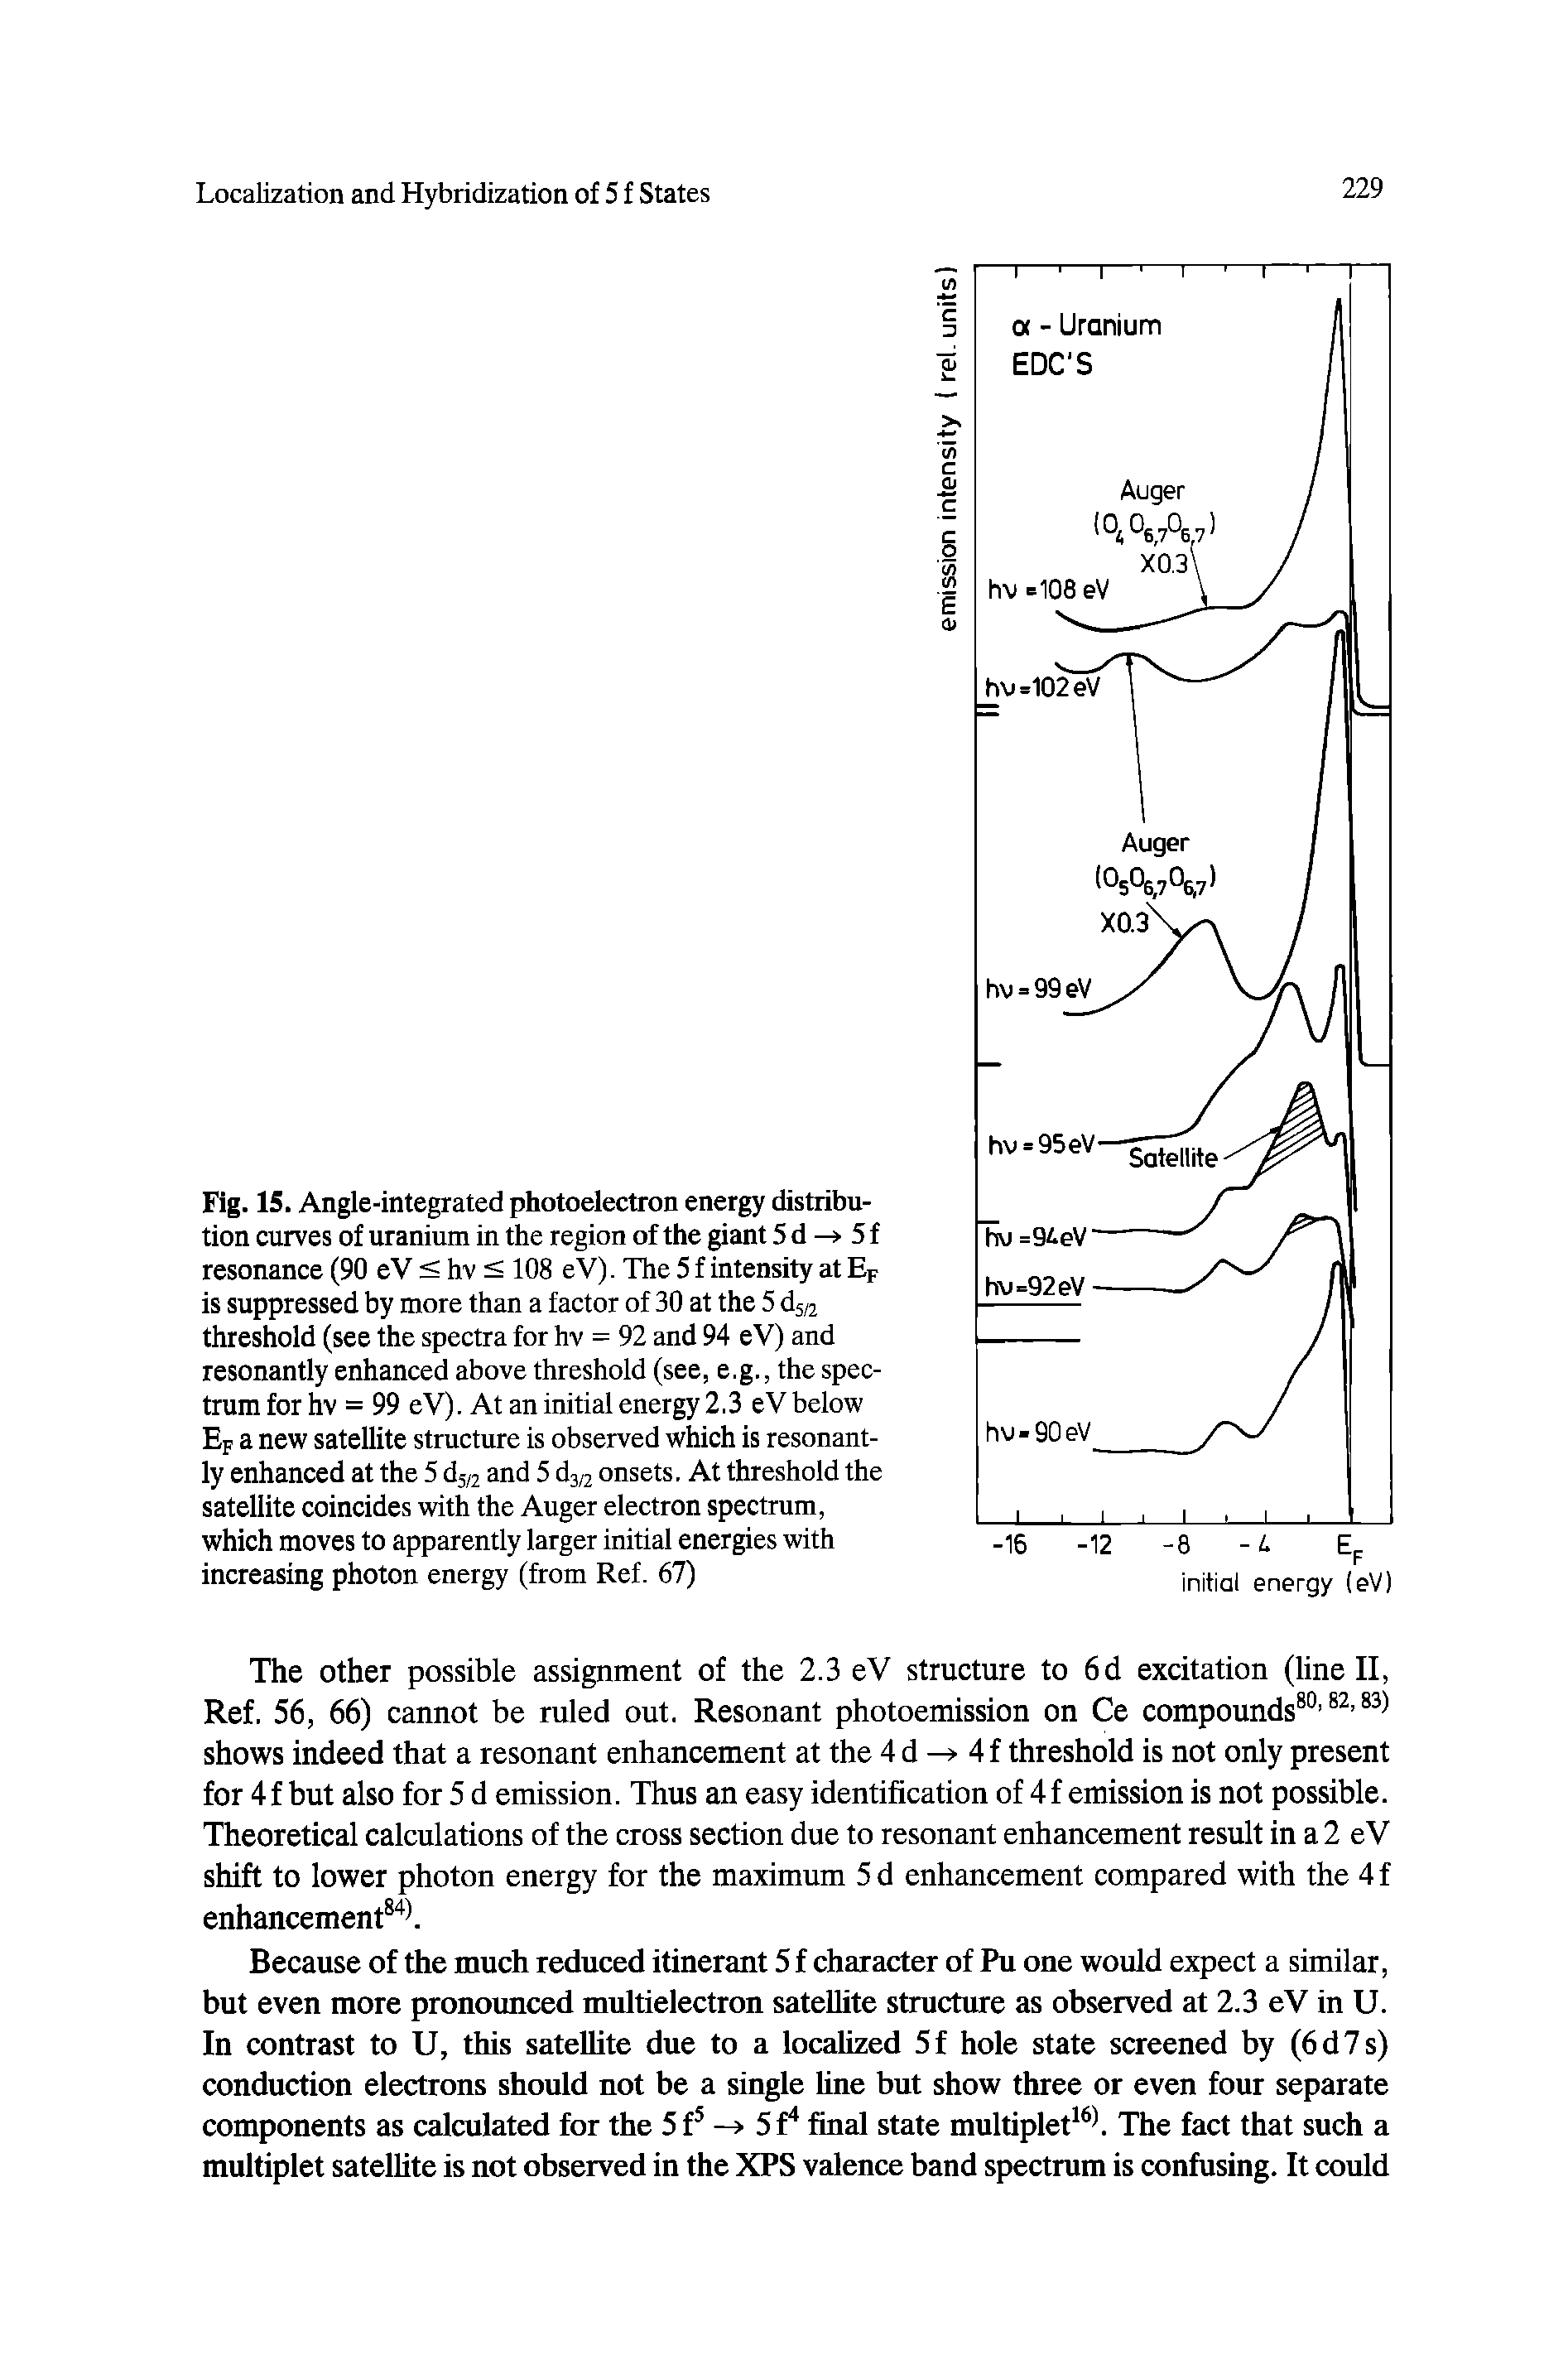 Fig. 15. Angle-integrated photoelectron energy distribution curves of uranium in the region of the giant 5 d -> 5 f resonance (90 eV < hv < 108 eV). The 5 f intensity at Ep is suppressed by more than a factor of 30 at the 5 ds/2 threshold (see the spectra for hv = 92 and 94 eV) and resonantly enhanced above threshold (see, e.g., the spectrum for hv = 99 e V). At an initial energy 2.3eV below Ep a new satellite structure is observed which is resonantly enhanced at the 5 d5/2 and 5 ds onsets. At threshold the satellite coincides with the Auger electron spectrum, which moves to apparently larger initial energies with increasing photon energy (from Ref. 67)...